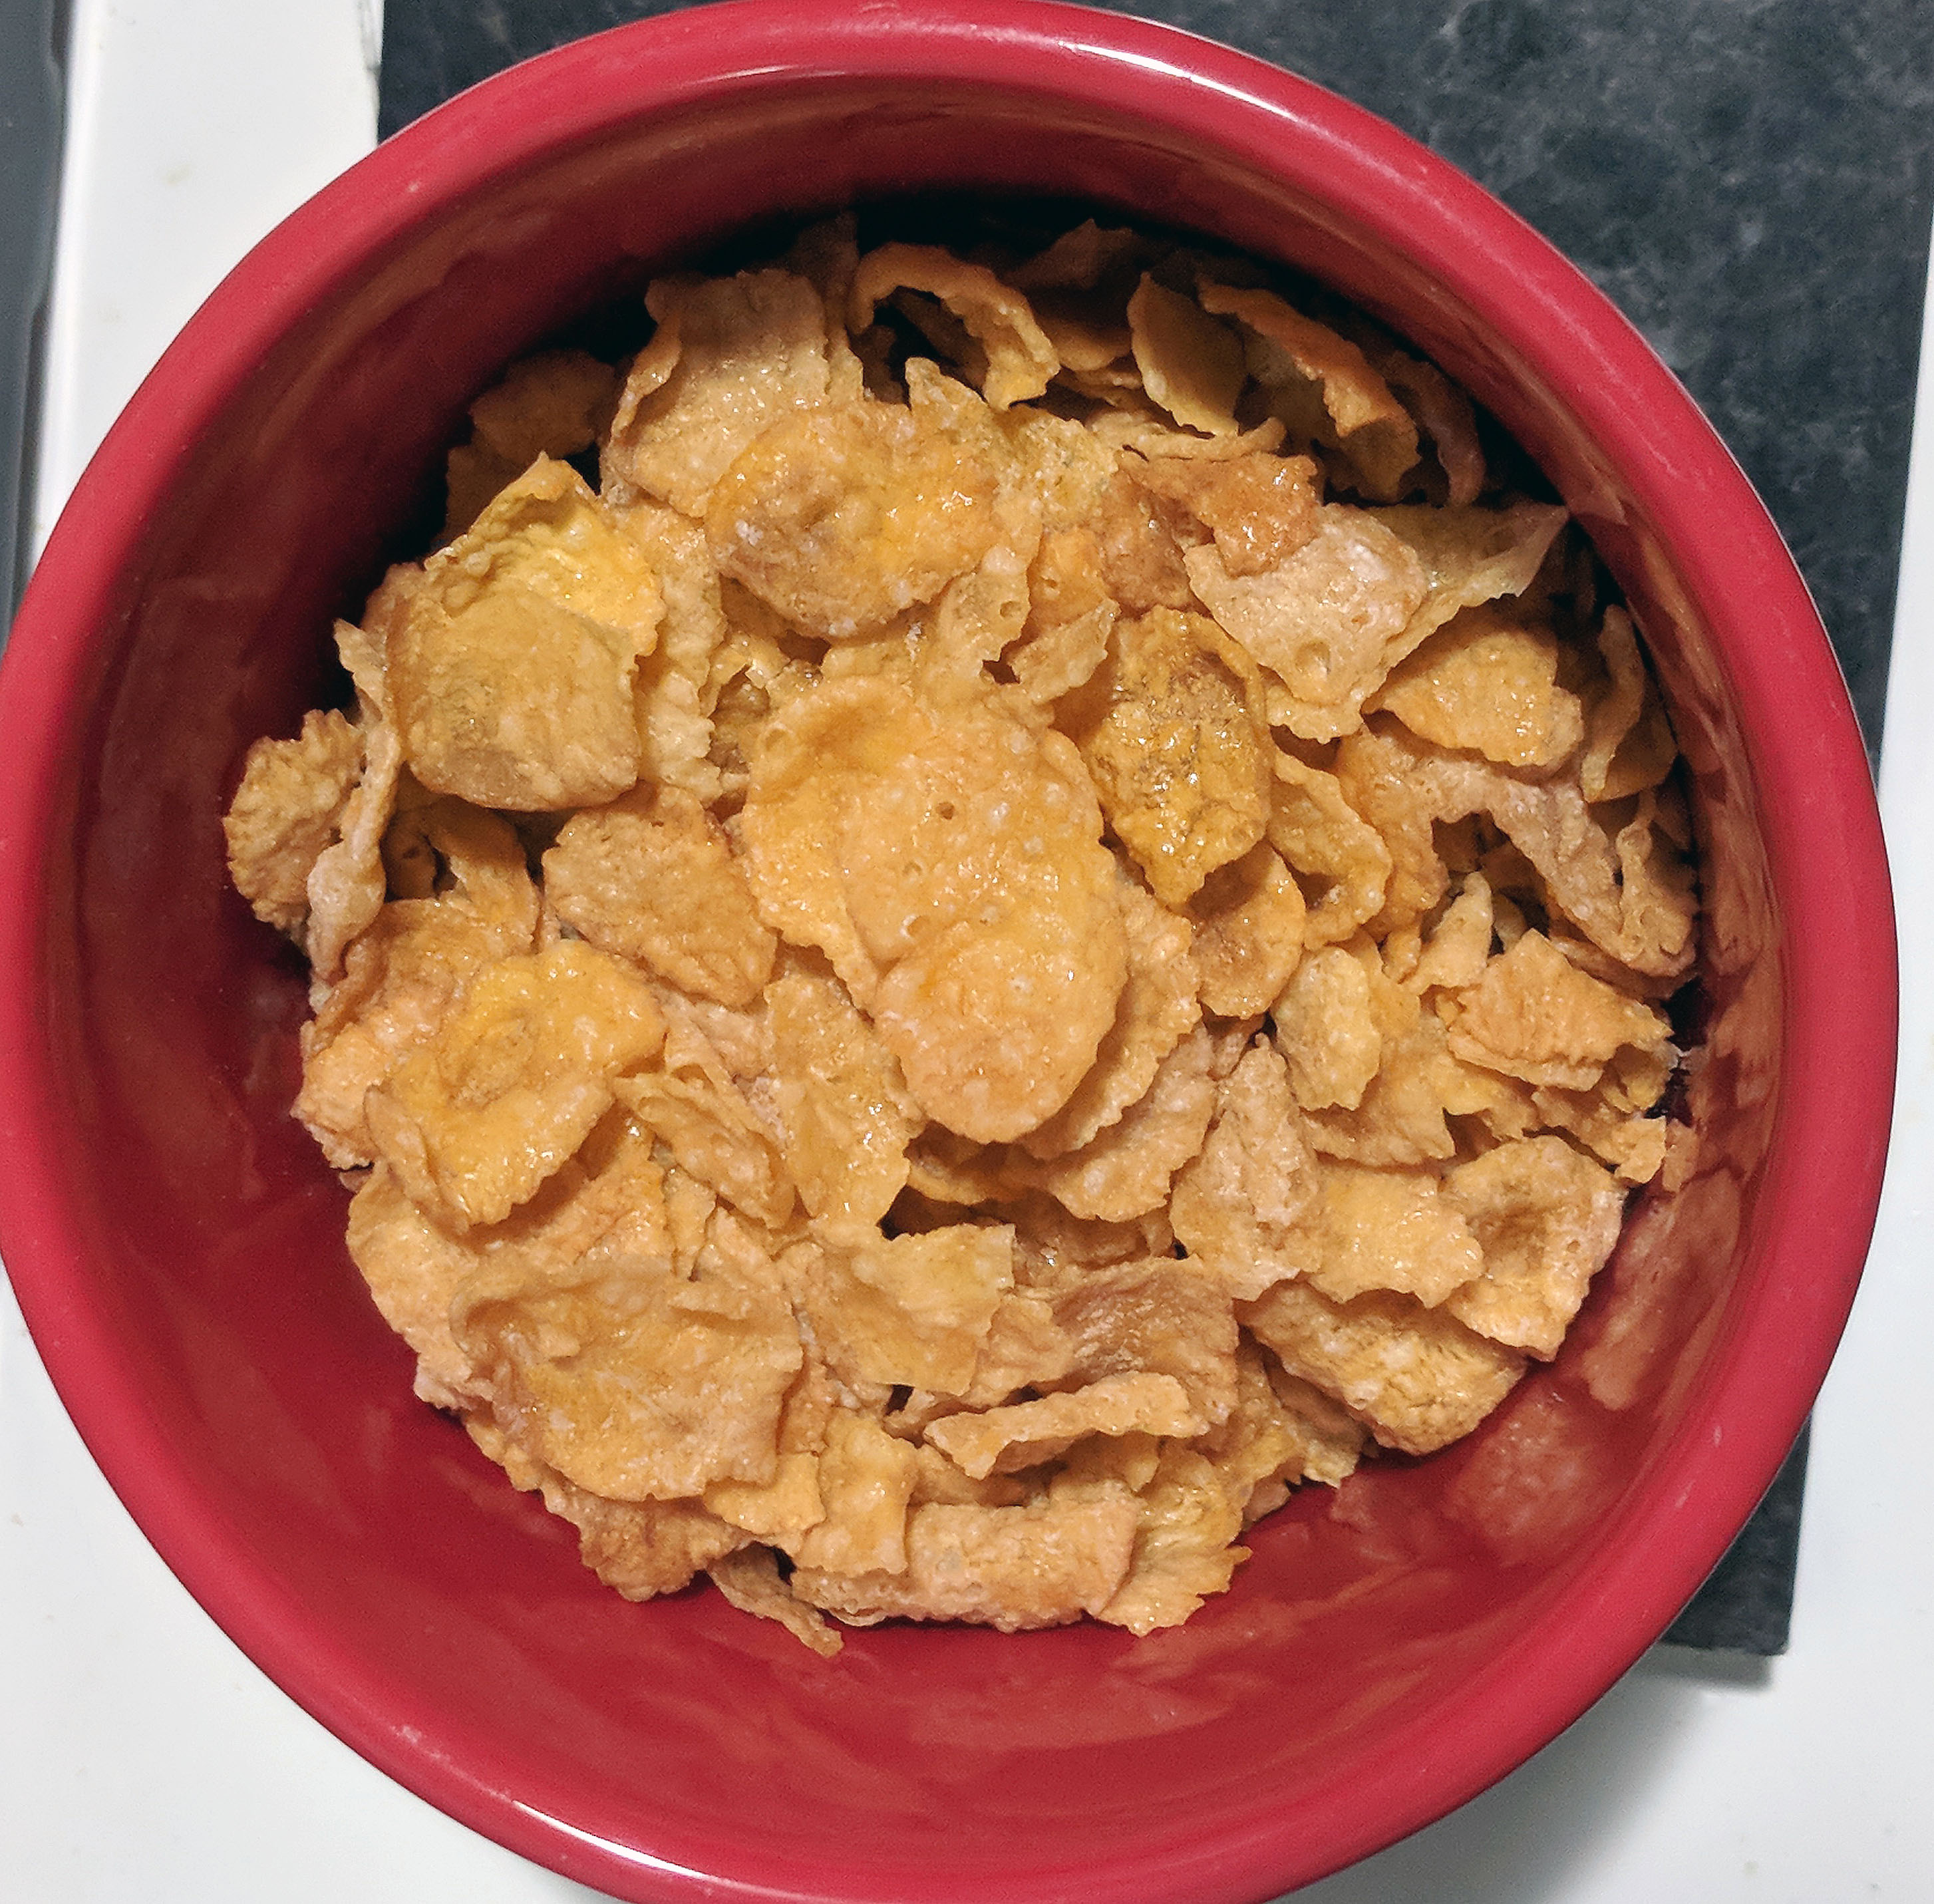 Honey & Nut Corn Flakes Cereal